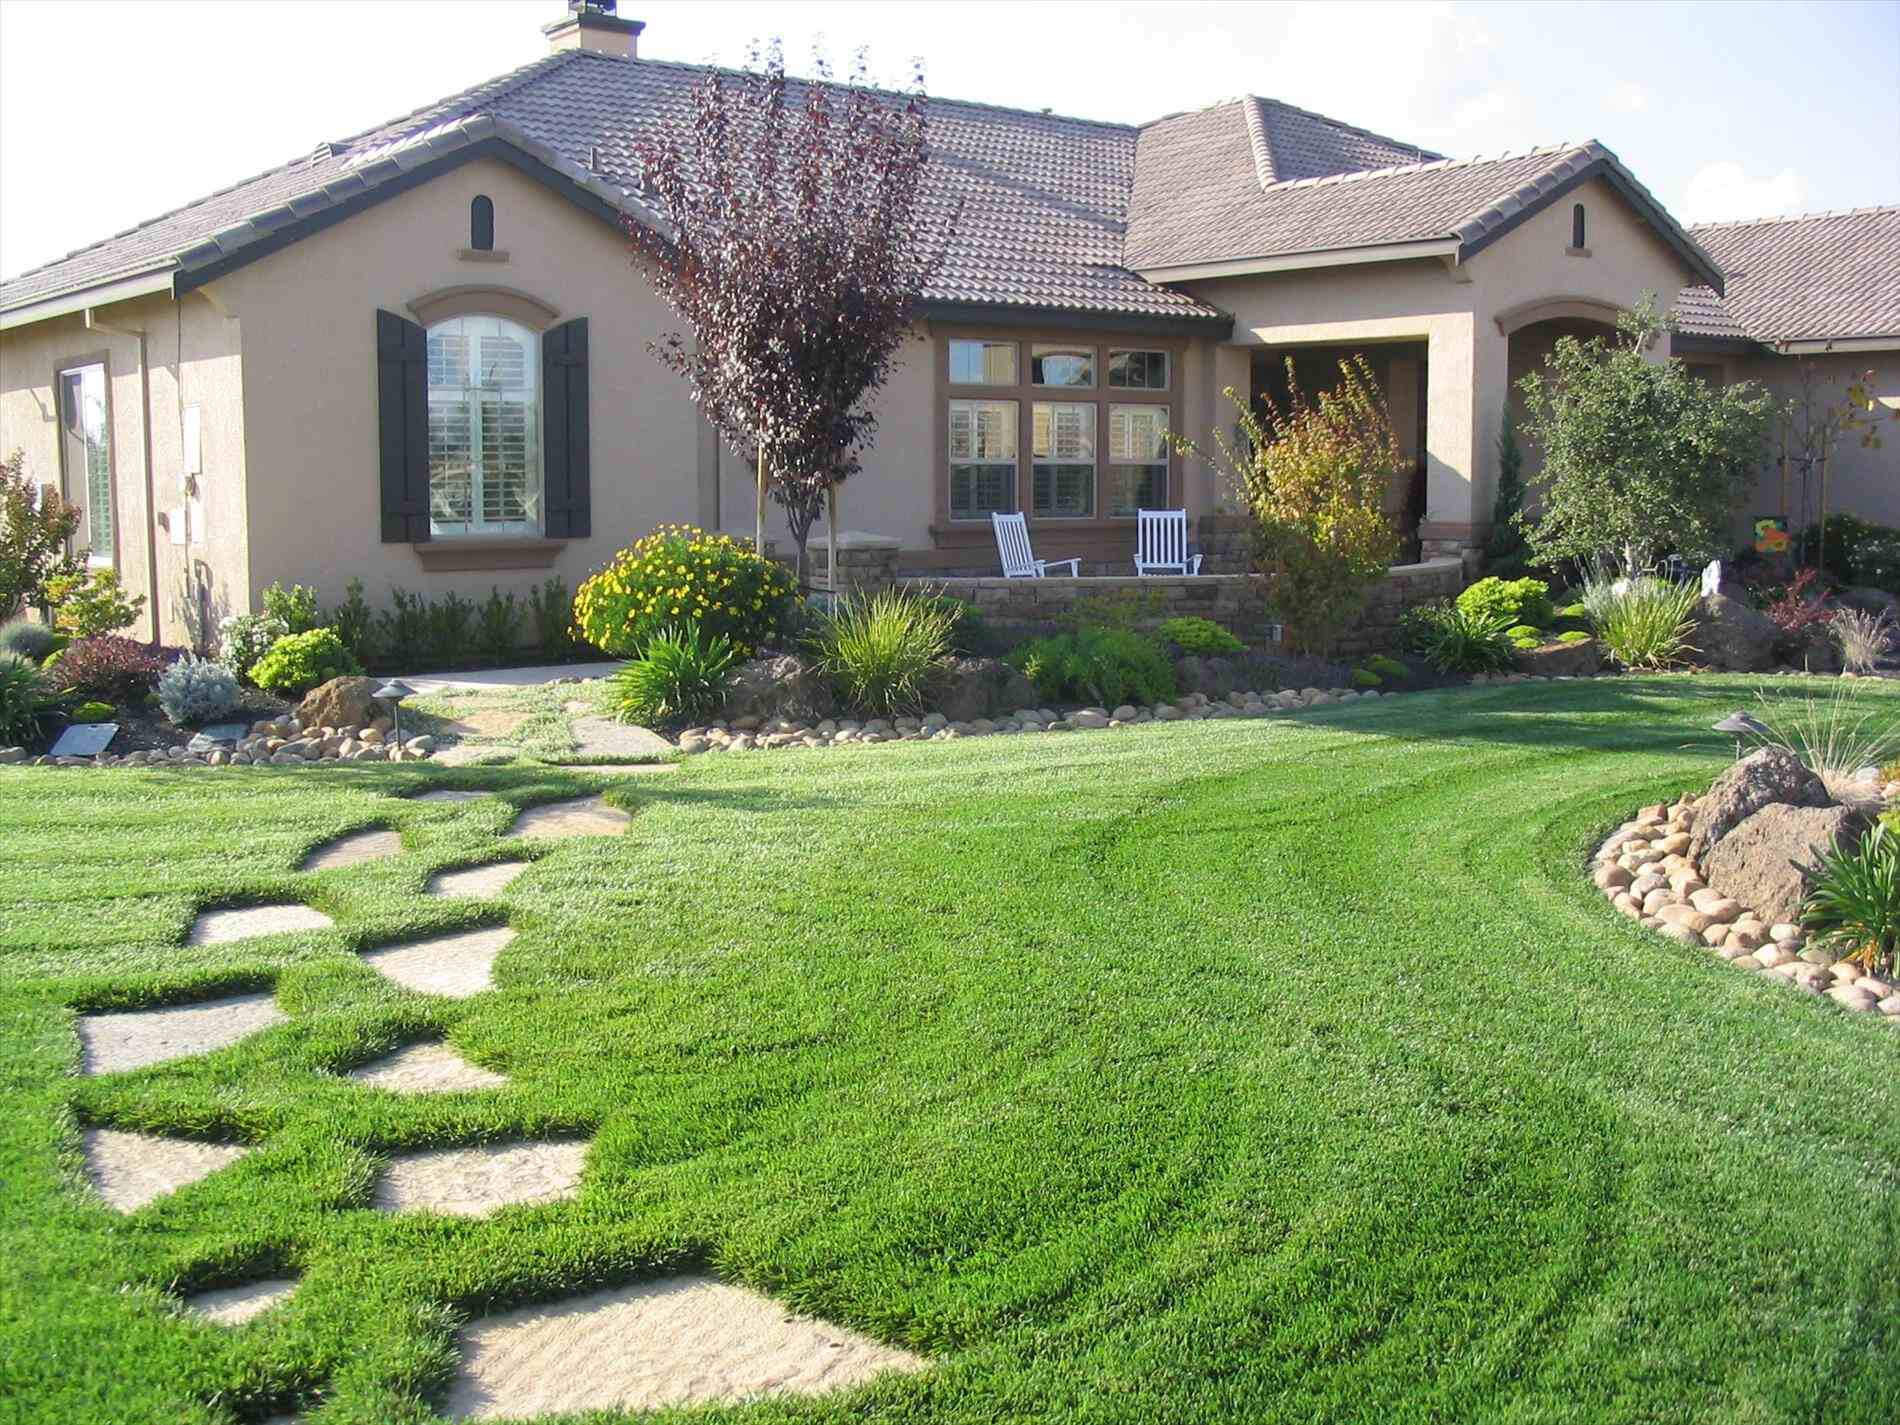 Home Landscape Design
 Tips to Landscaping with Ranch Style Home Interior